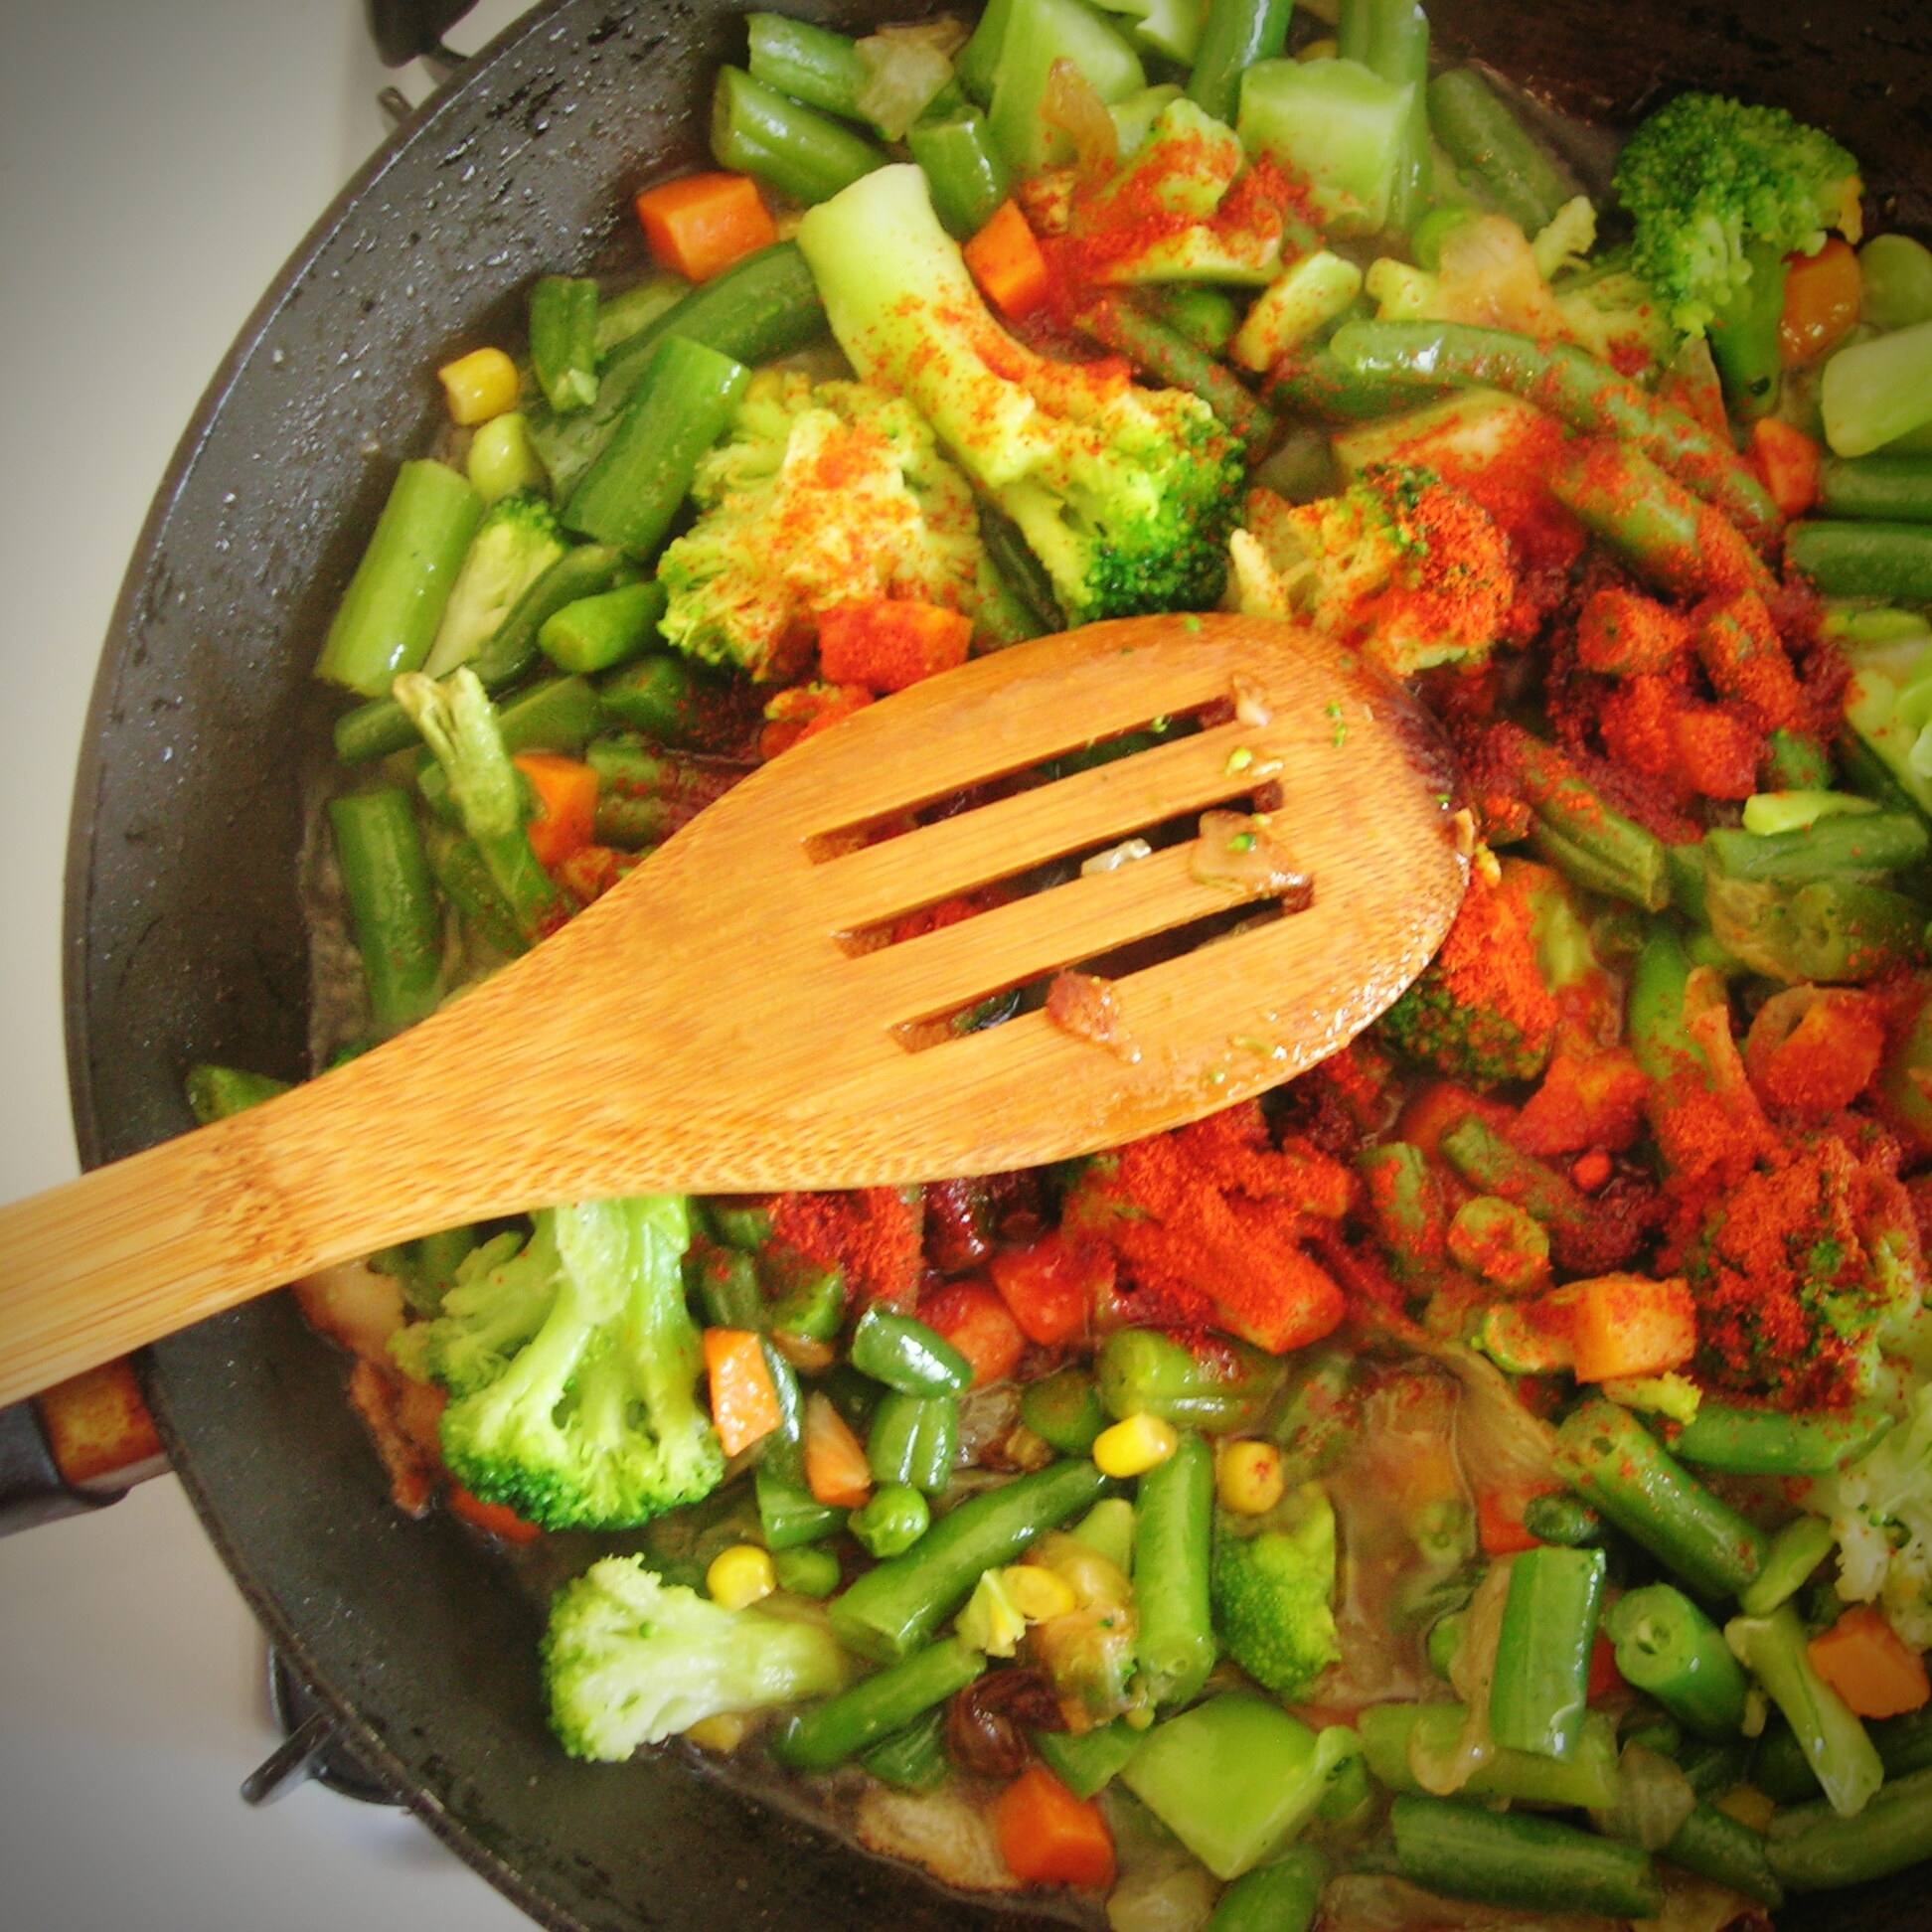 Cooking vegetables with spices in a skillet.